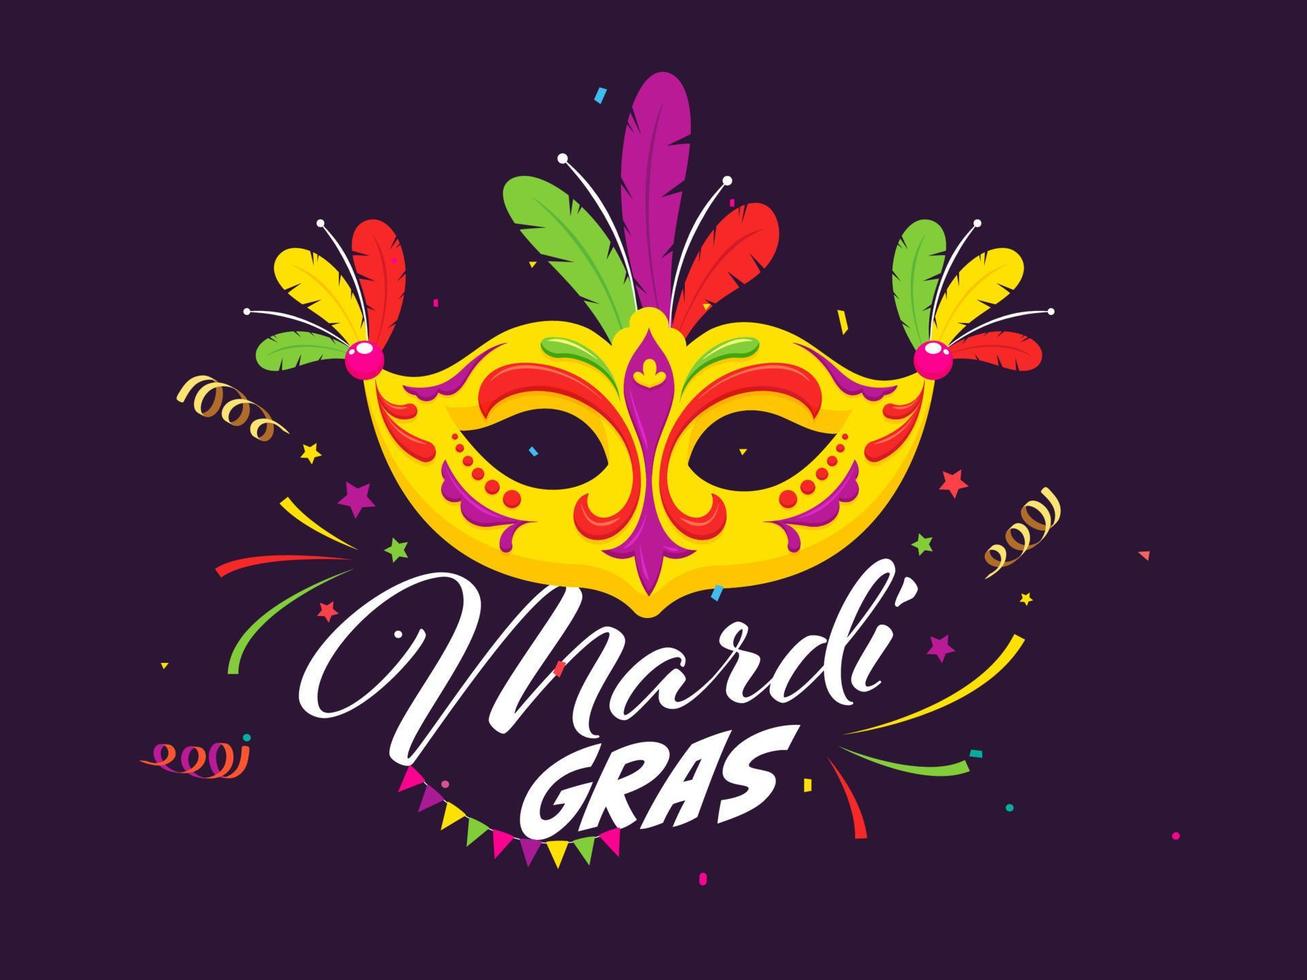 Mardi Gras Celebration Poster Design with Colorful Party Mask and Confetti Decorated on Purple Background. vector